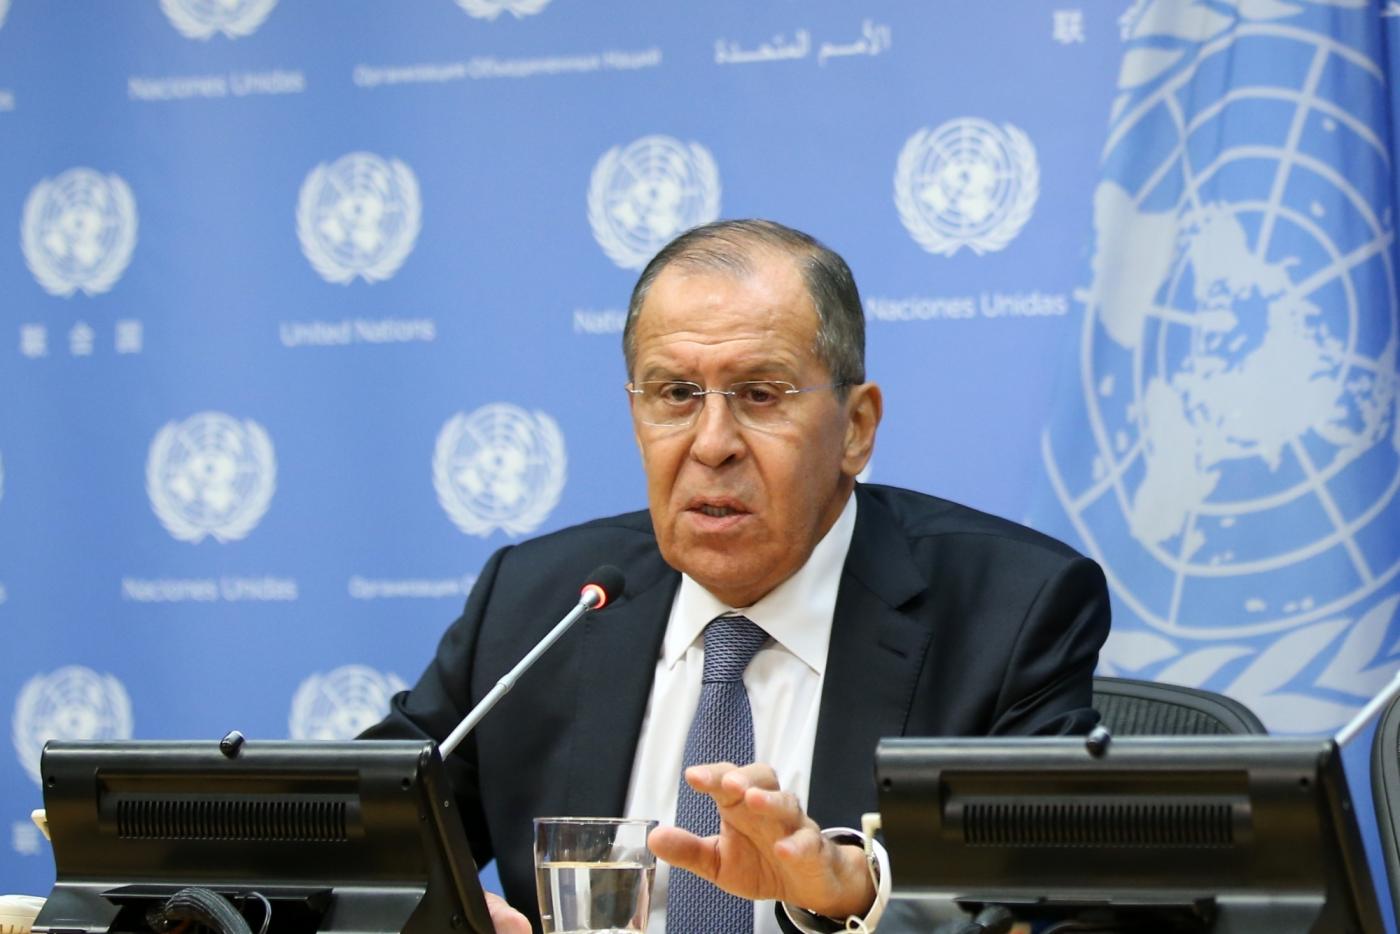 UNITED NATIONS, Sept. 29, 2018 (Xinhua) -- Russian Foreign Minister Sergey Lavrov attends a press conference at the UN headquarters in New York on Sept. 28, 2018. (Xinhua/Qin Lang/IANS) by .